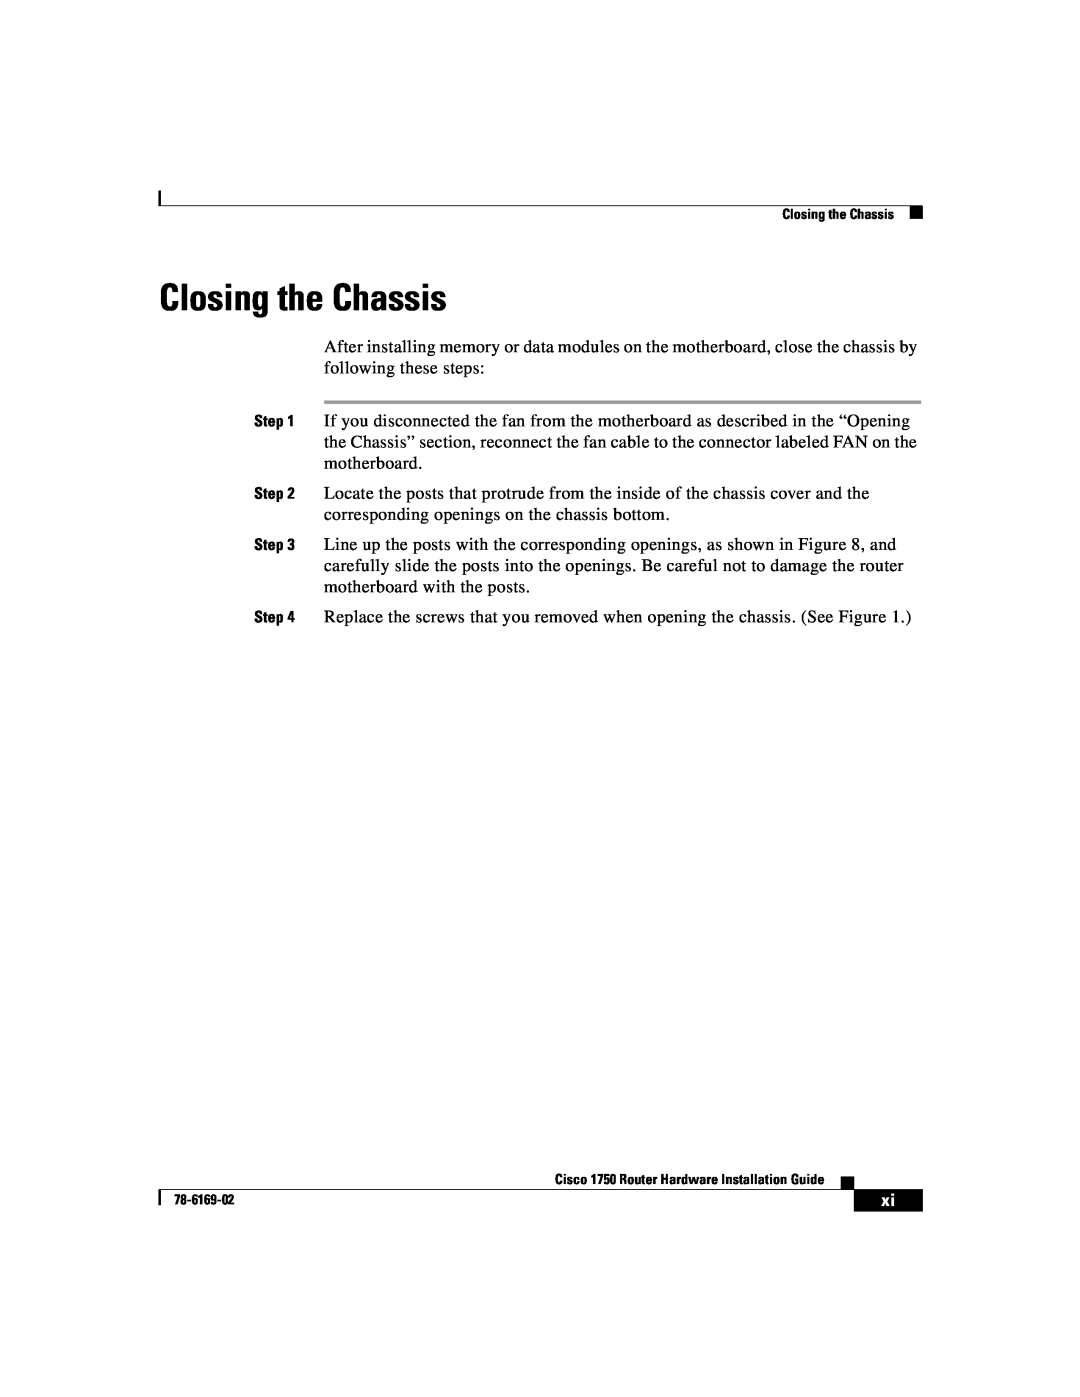 Cisco Systems CISCO1750 manual Closing the Chassis 